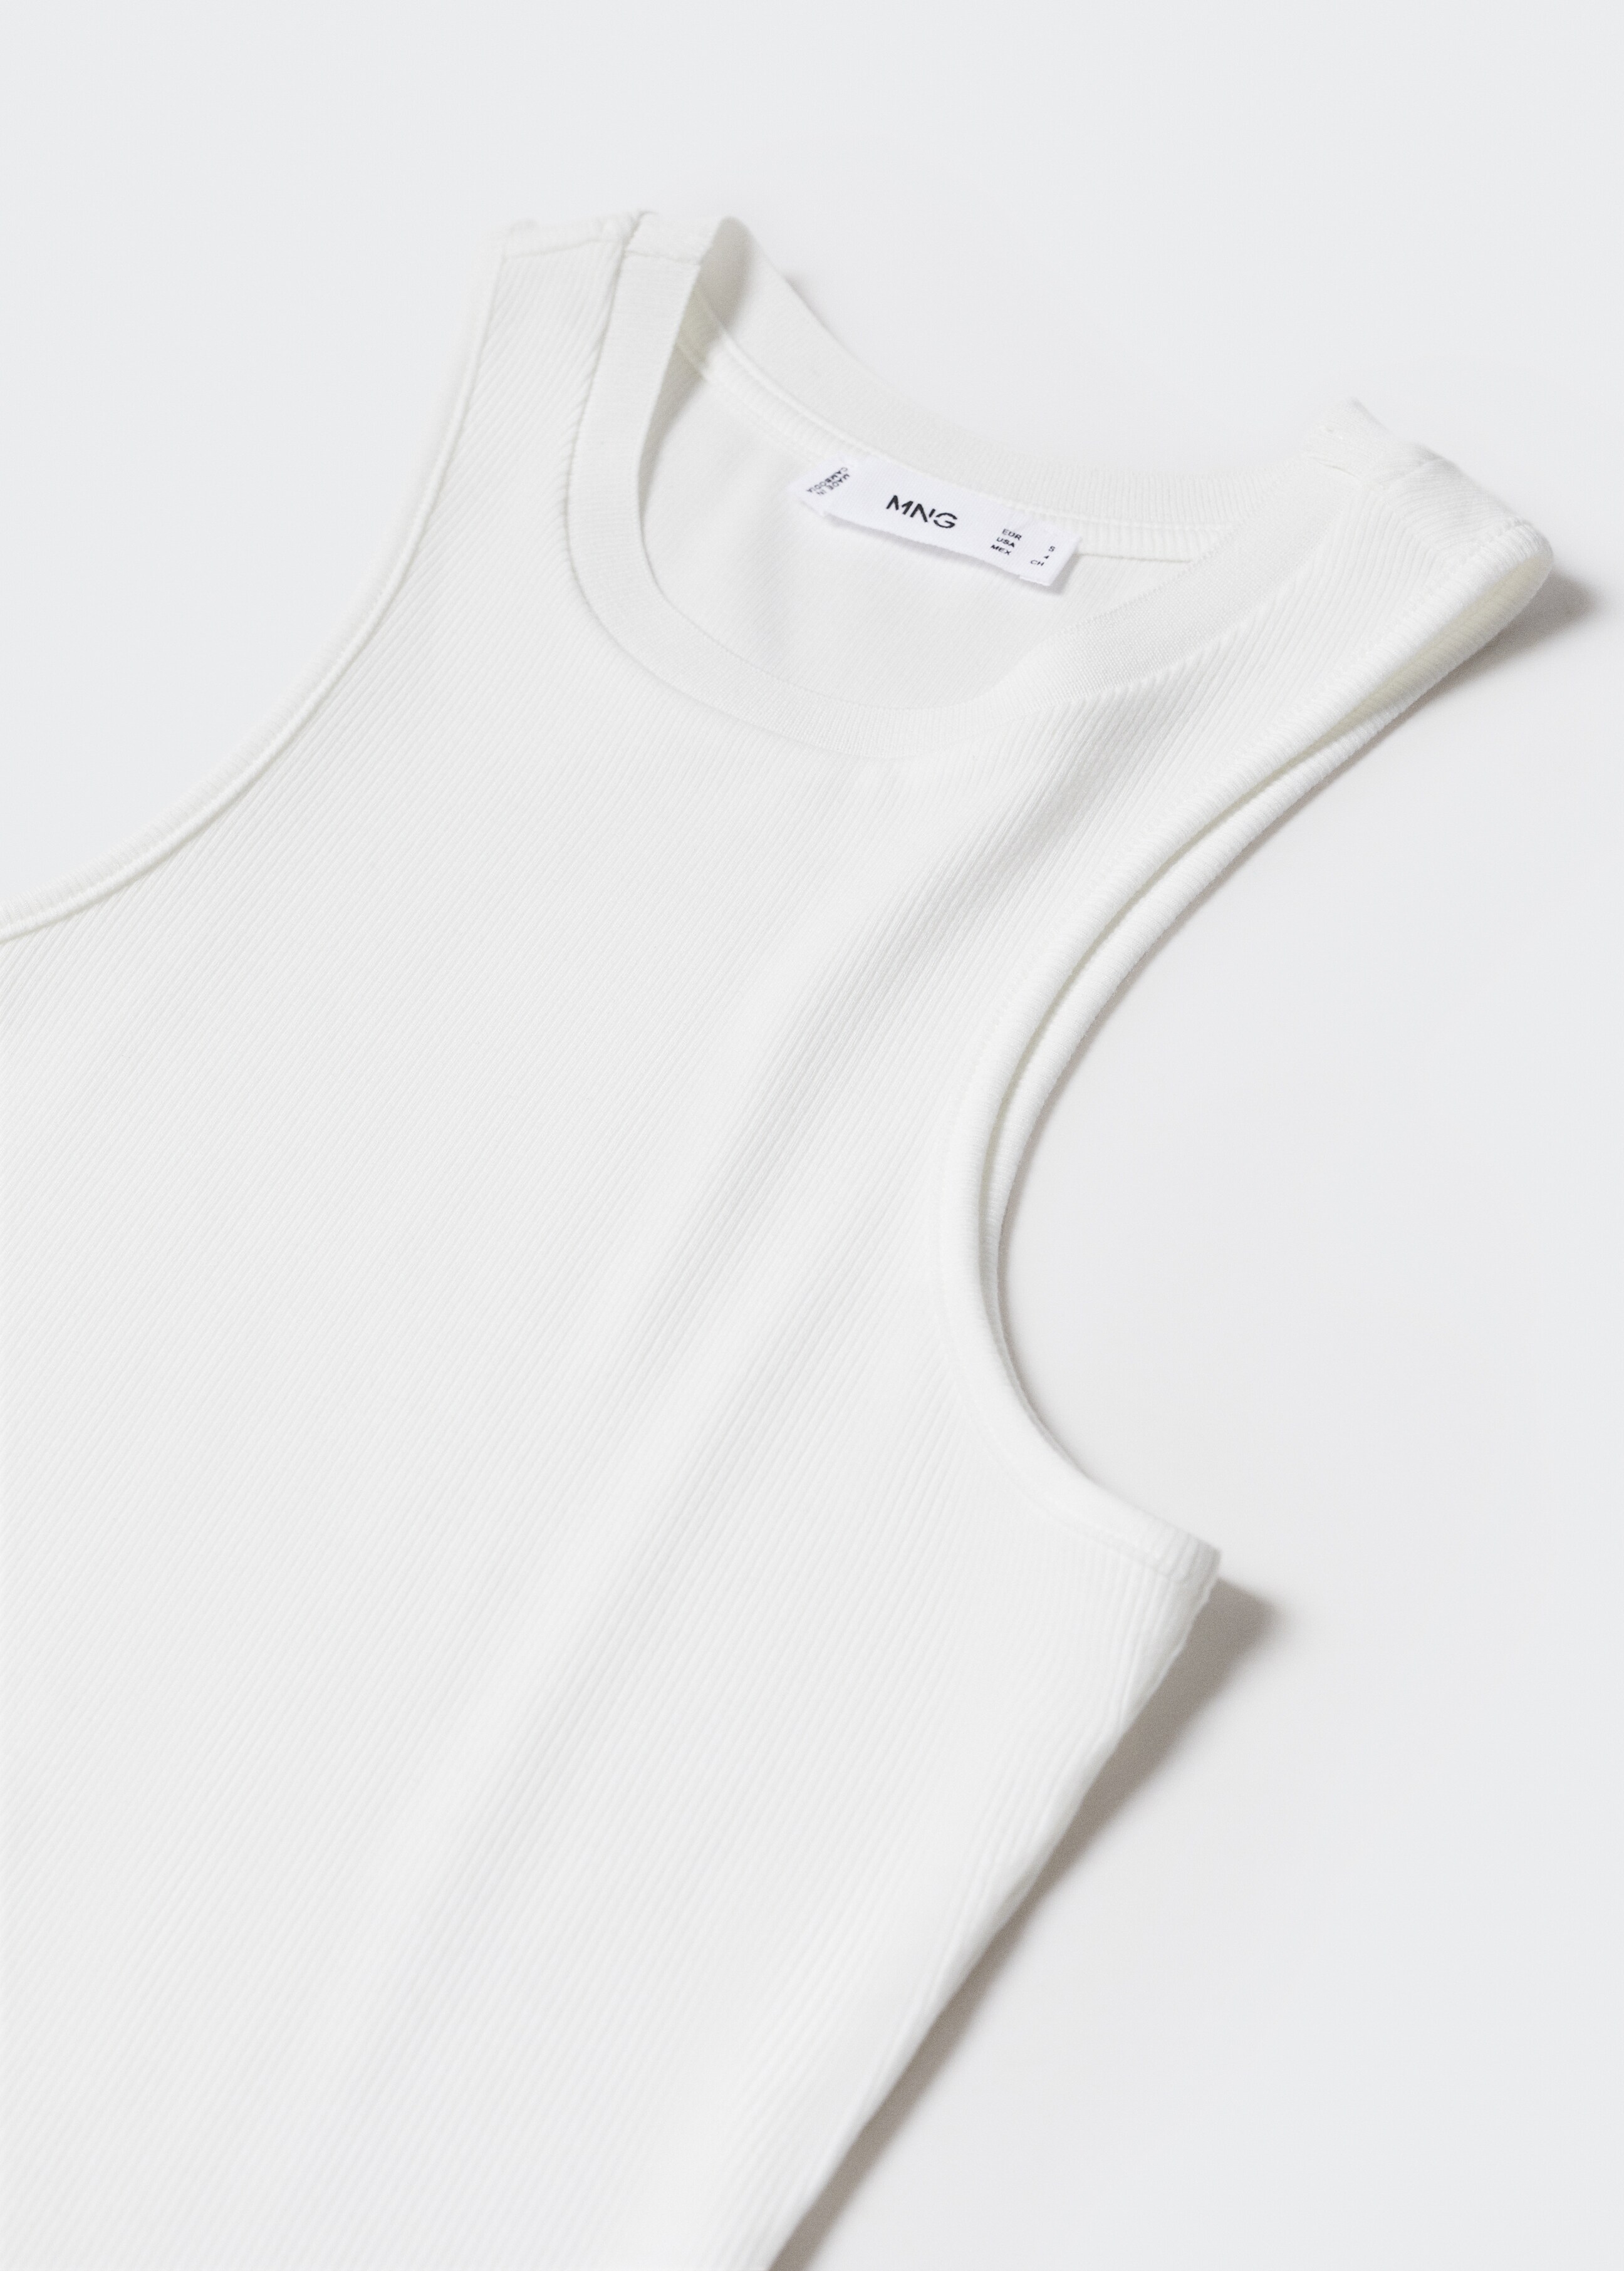 Ribbed strap top - Details of the article 8